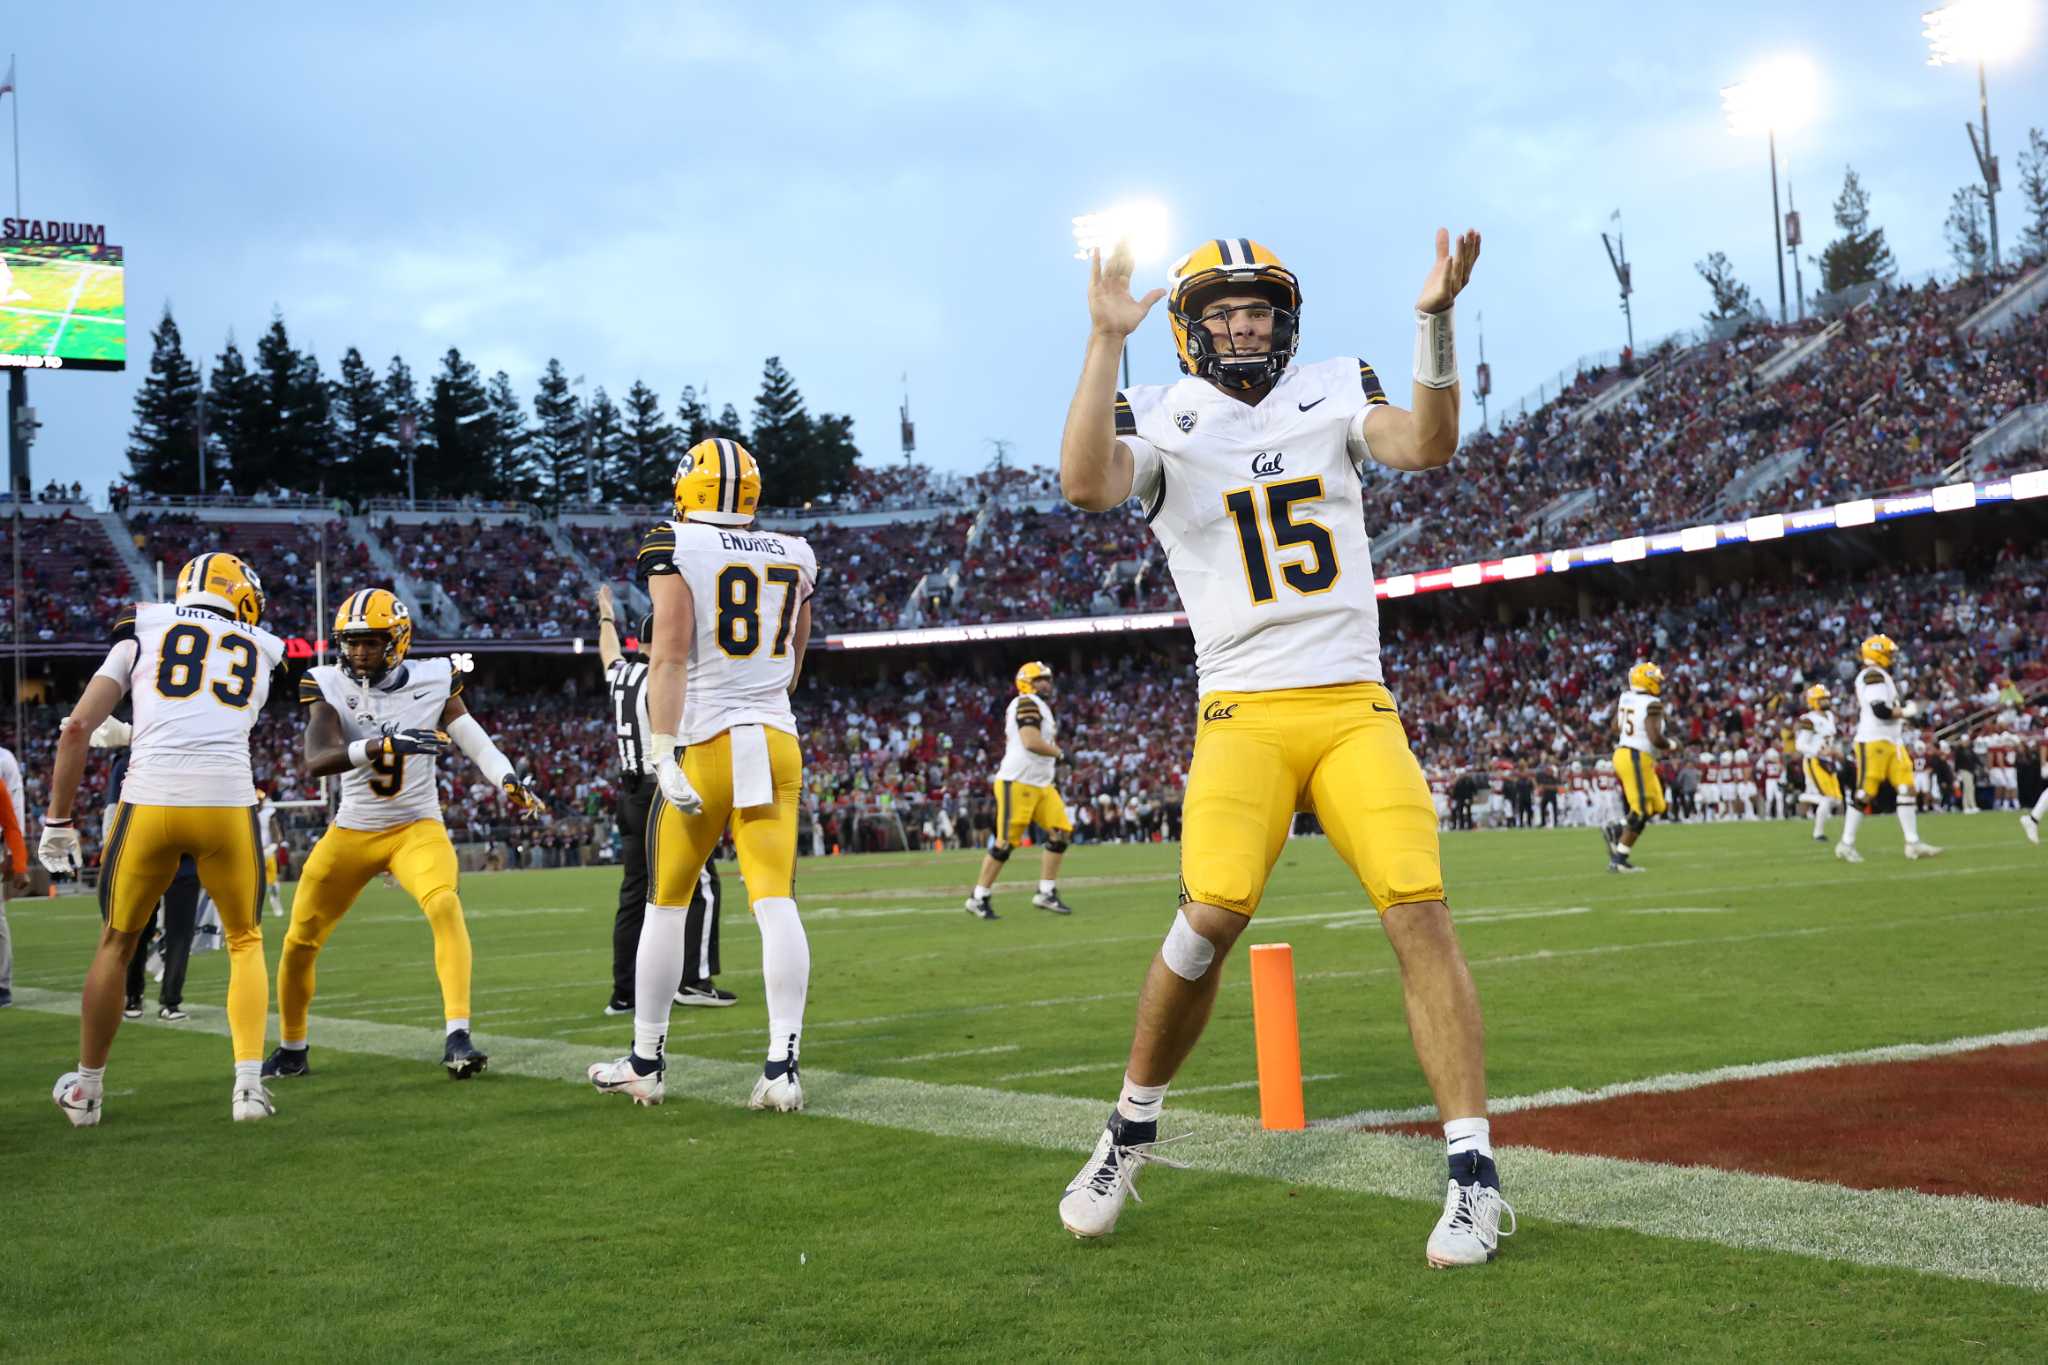 UCLA vs. Stanford, 2012 Pac-12 Championship game: Preview and TV schedule -  SB Nation Bay Area